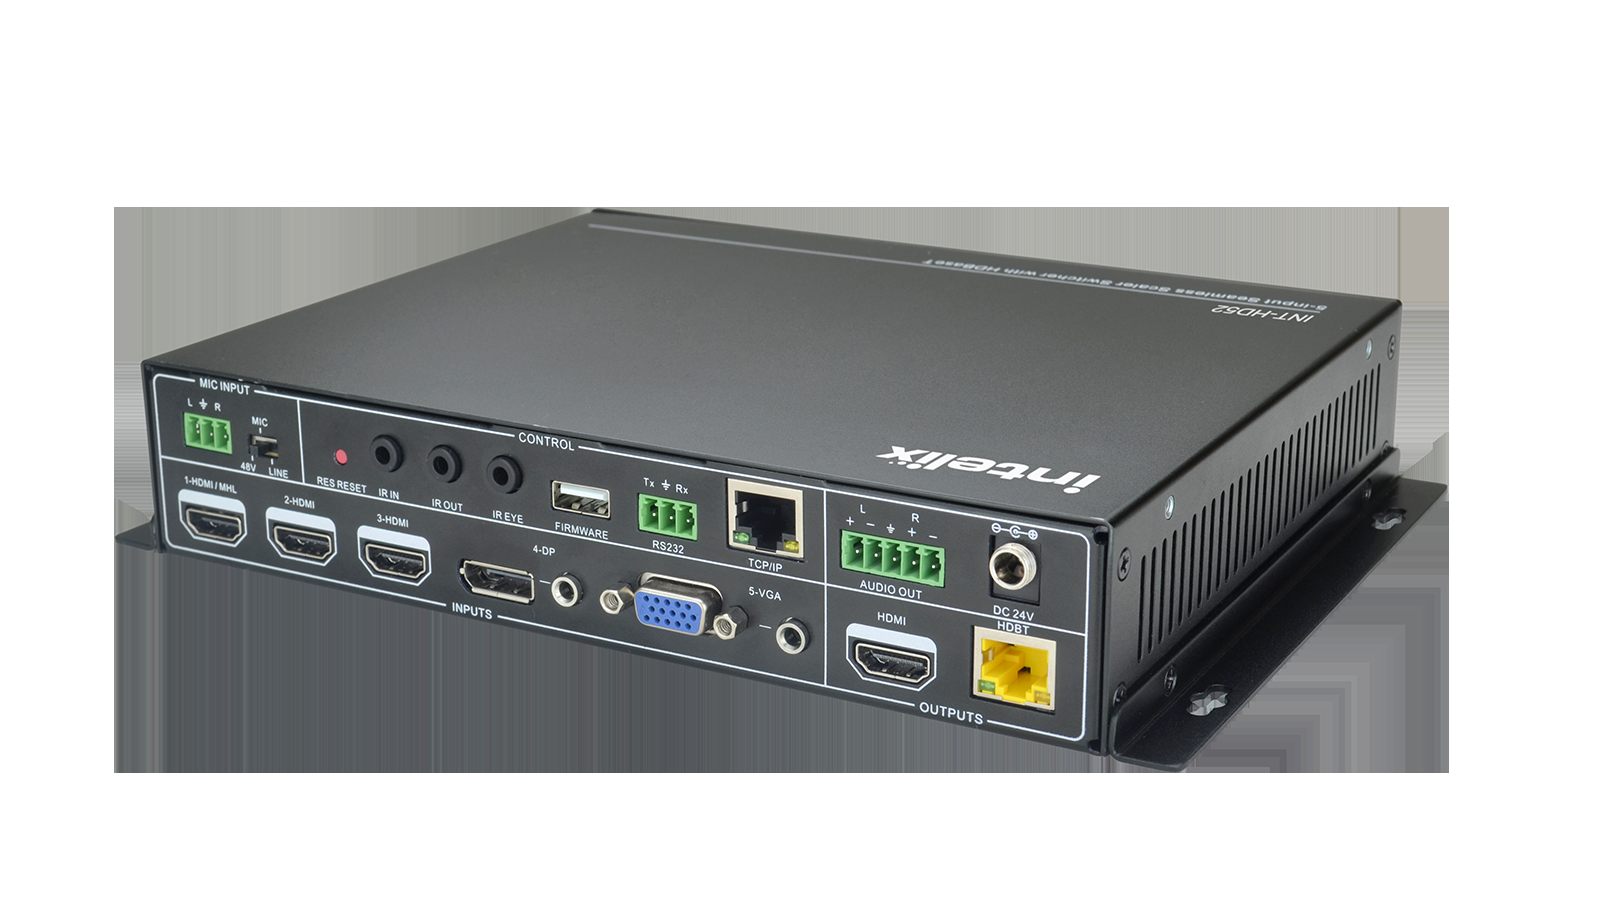 Lit Bébé Transportable Belle Int Hd52 5×1 1 Auto Switching Scaling Presentation Switch with